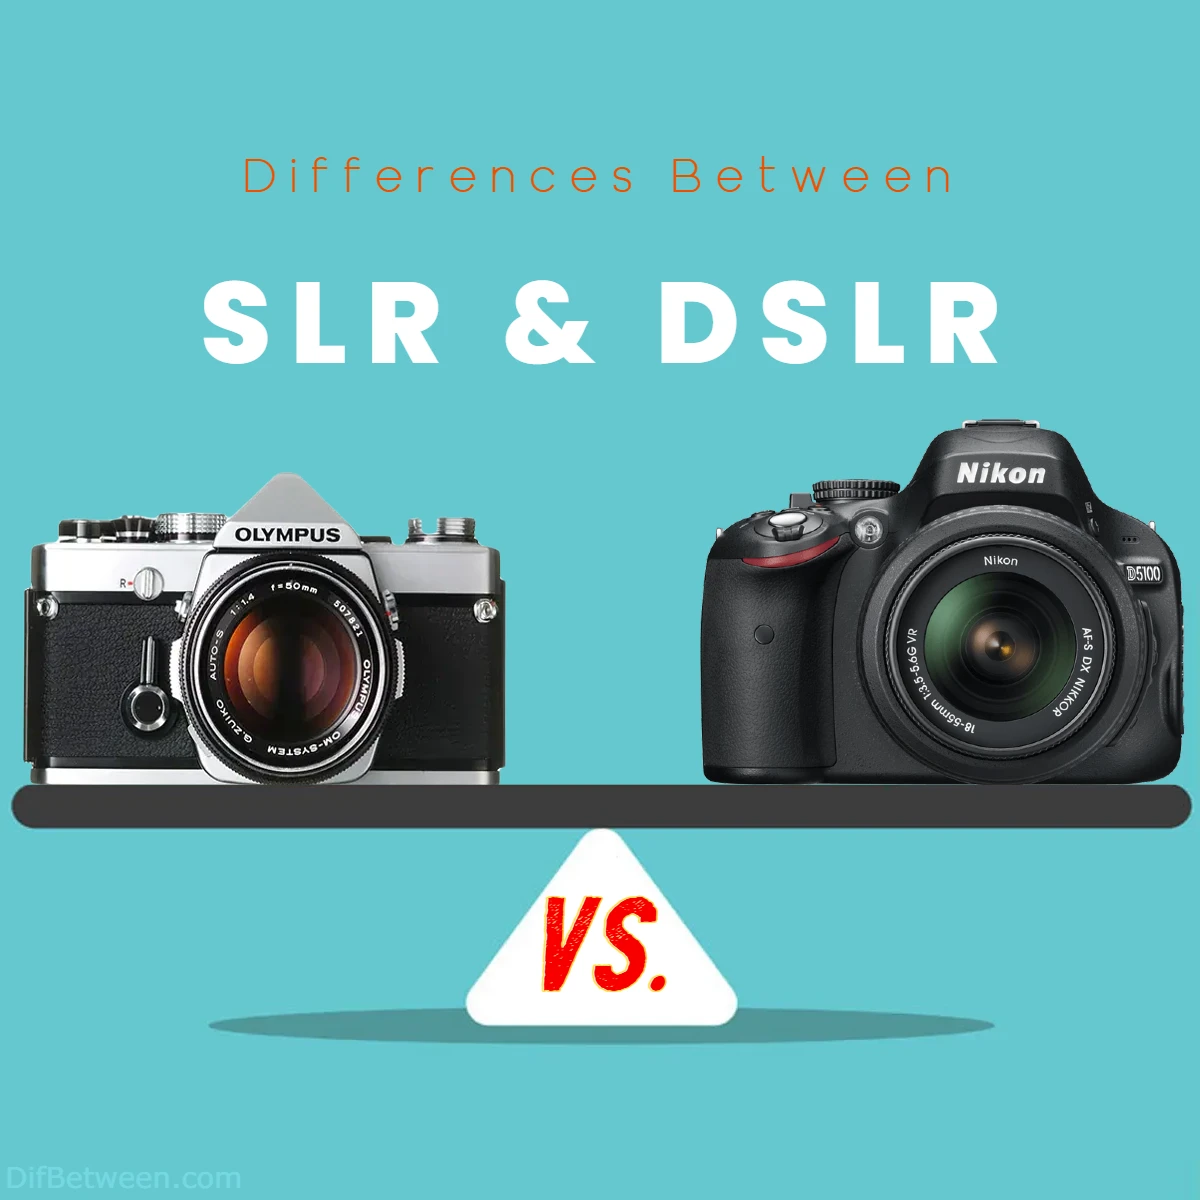 Difference Between SLR and DSLR